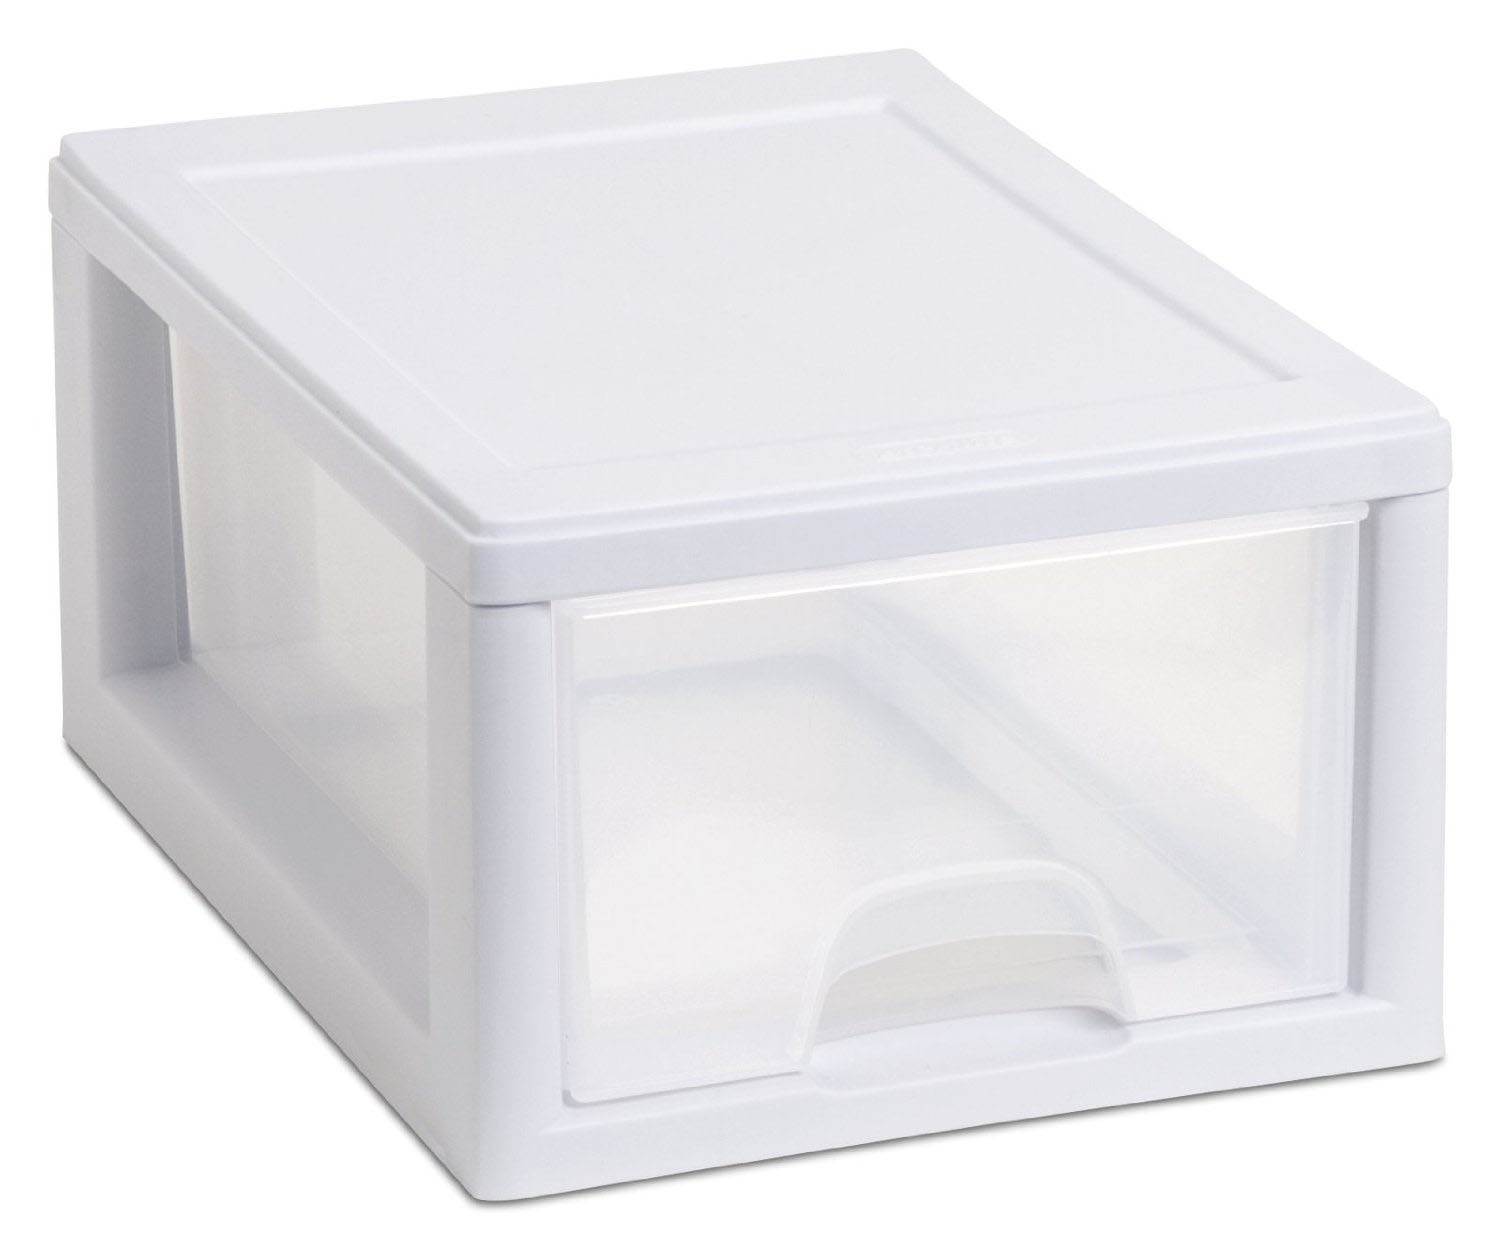 Sterilite 16 Qt Clear Stacking Storage Drawer Container (6 Pack) + 6 Qt